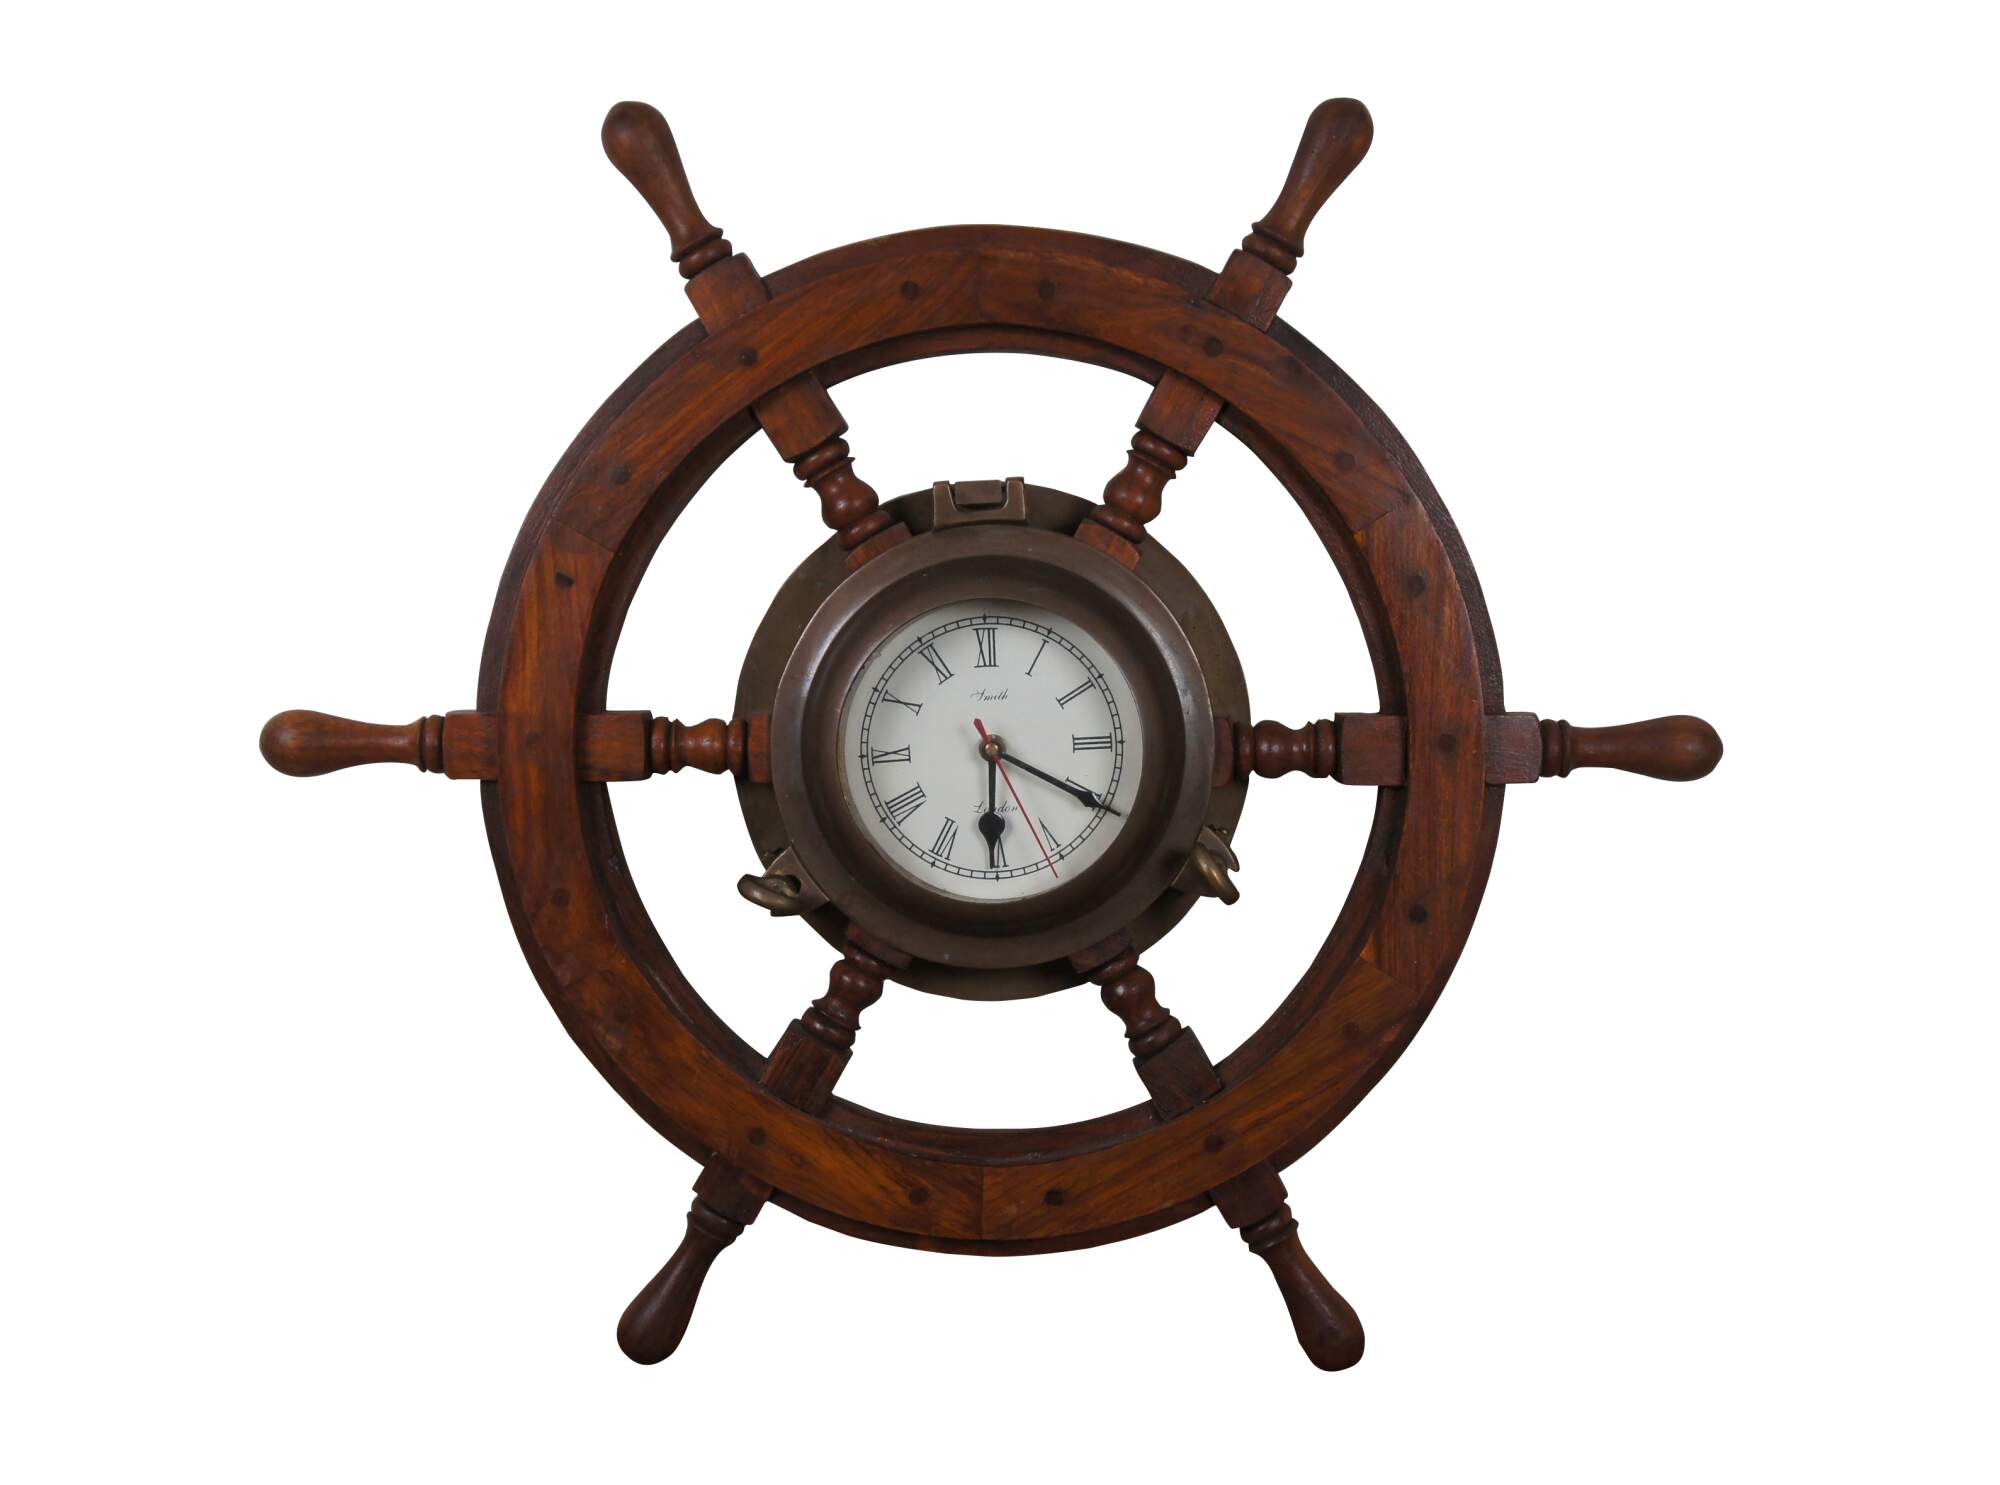 BRASS MARINE PORT HOLE CLOCK MADE FOR THE ROYAL NAVY LONDON